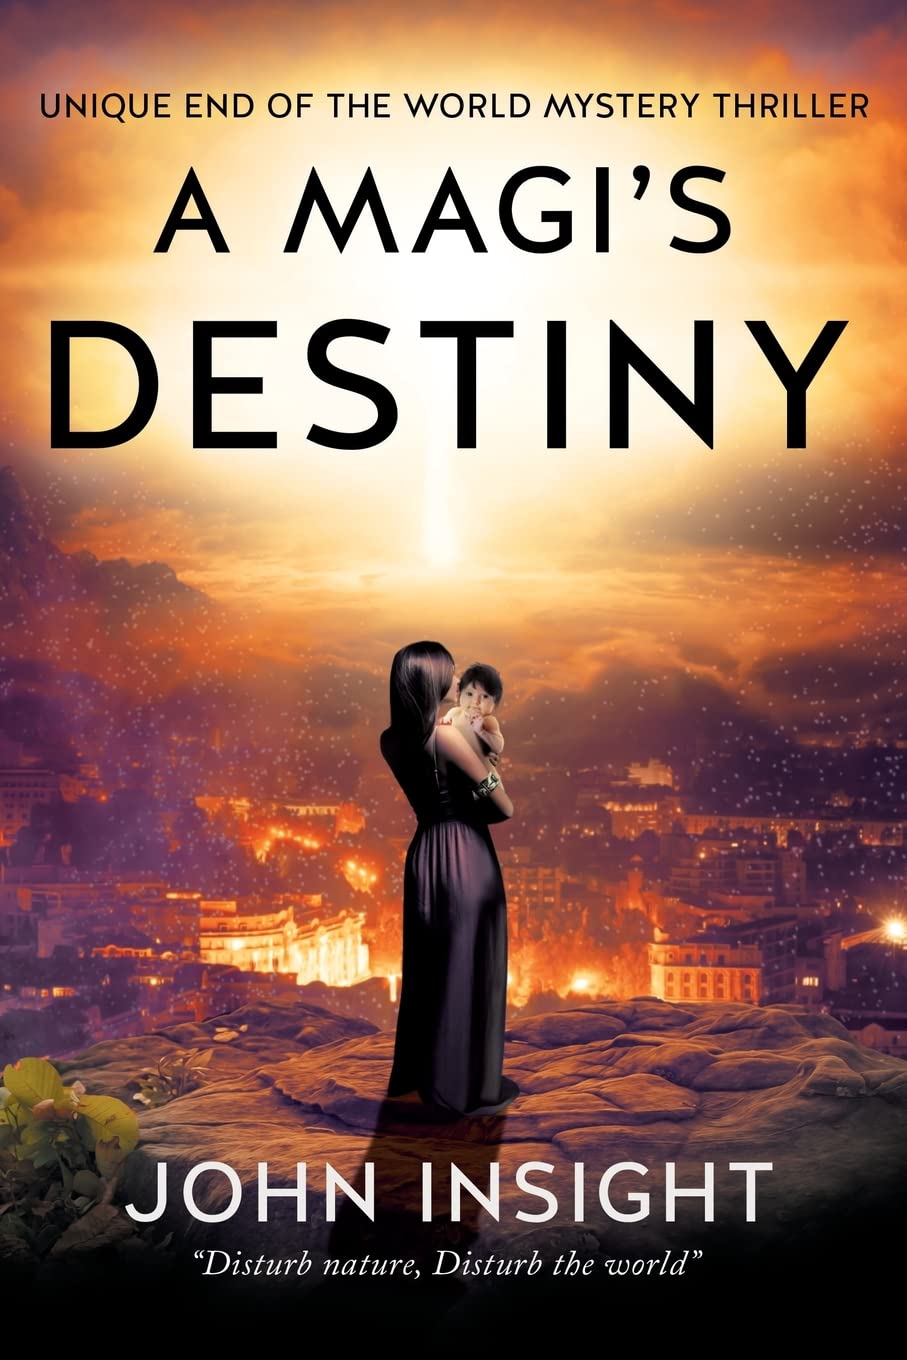 The new novel A Magi’s Destiny by John Insight M.A. is released. 